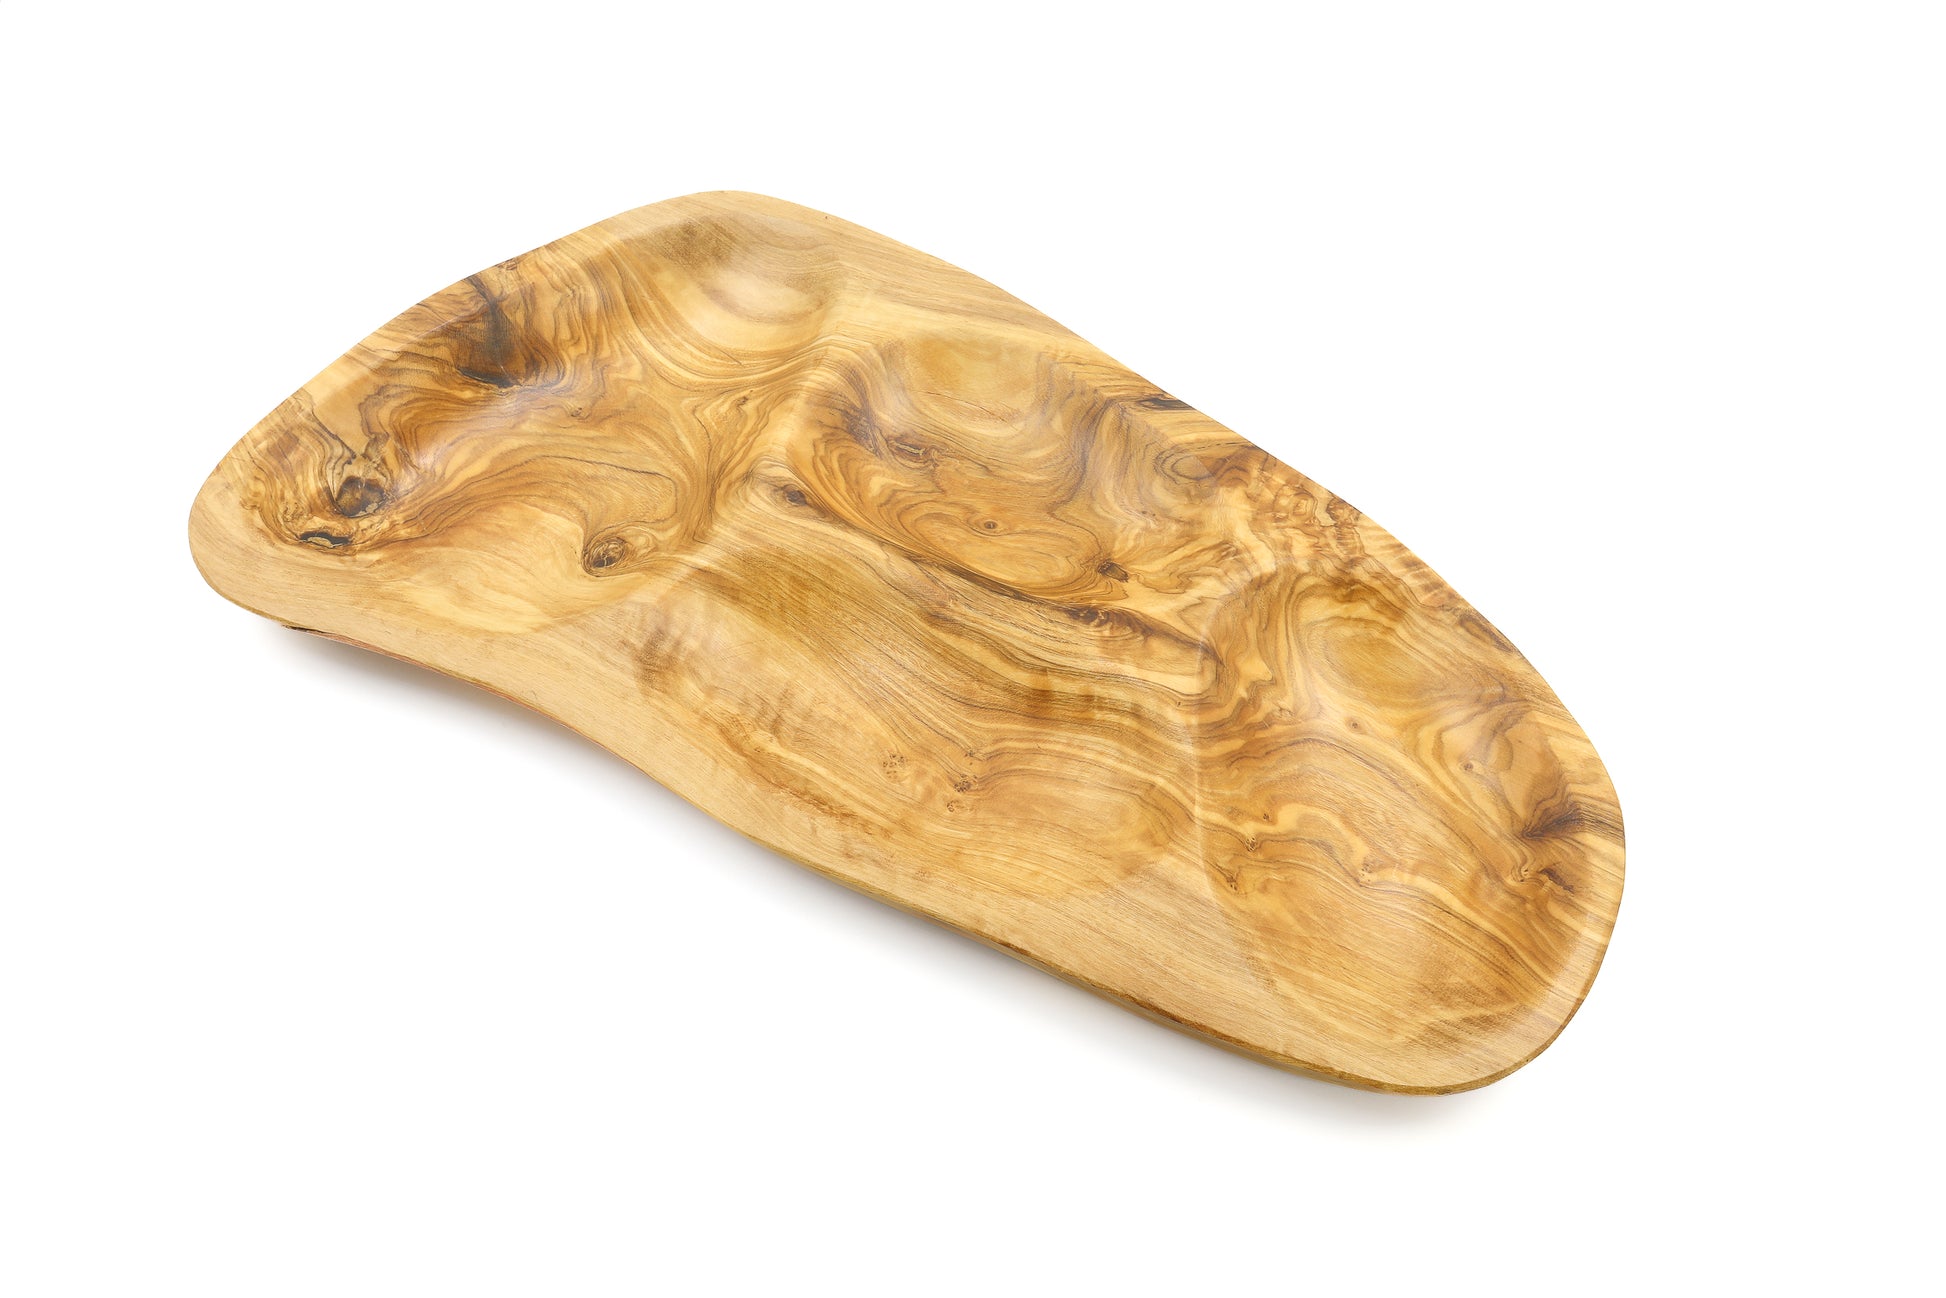 Olive wood irregular-shaped appetizer tray with sectional divisions